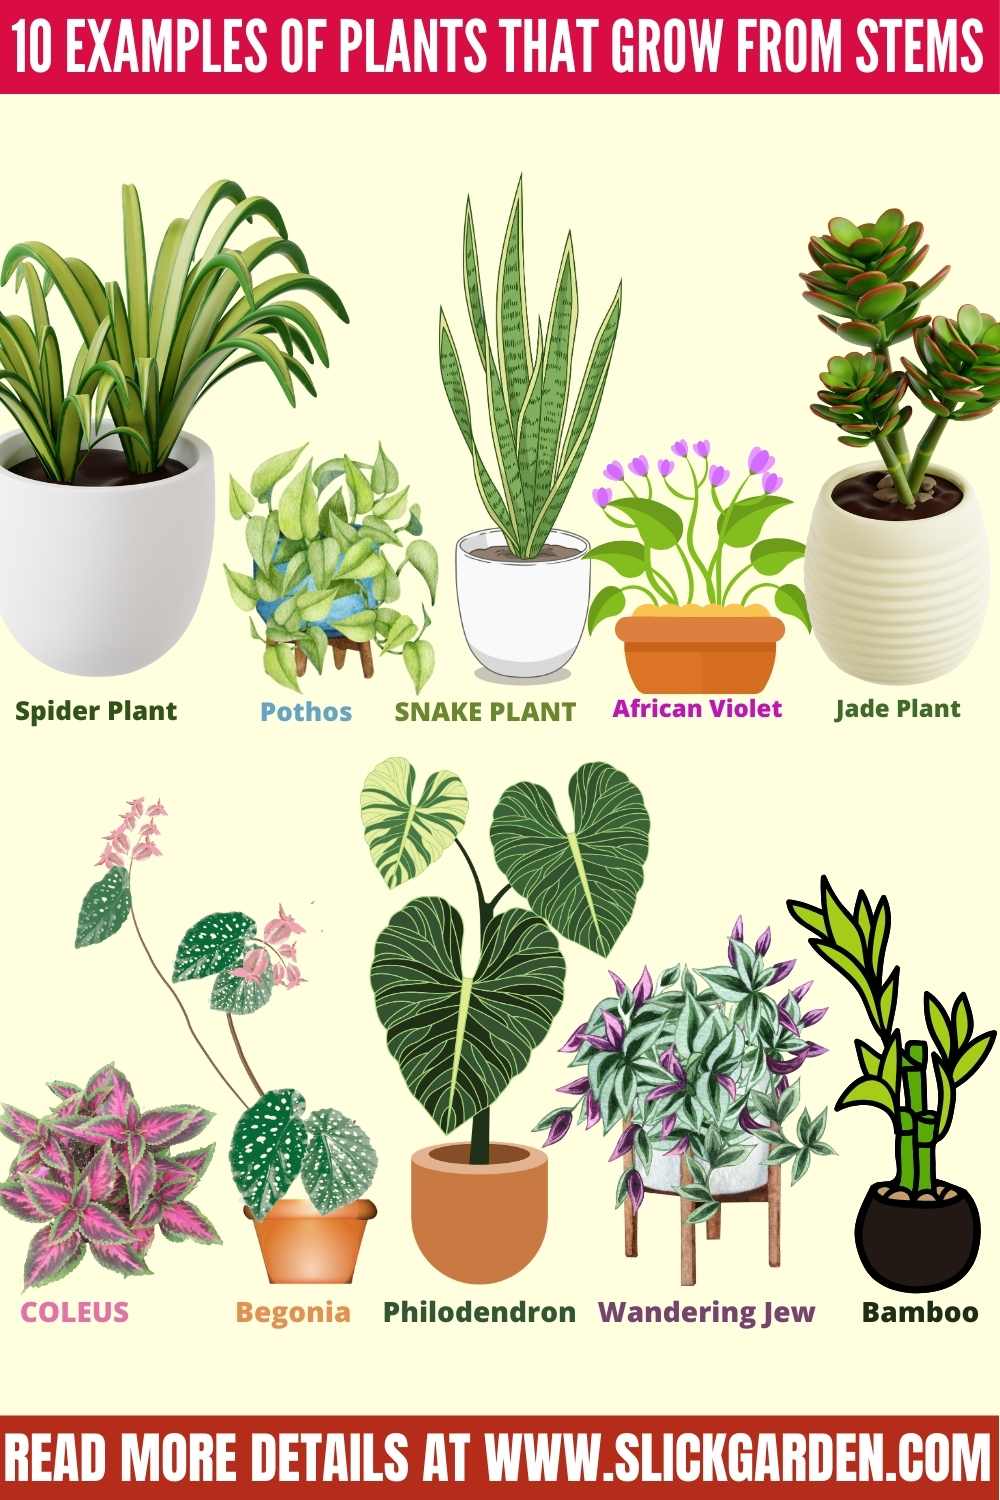 10 Examples Of Plants That Grow From Stems - infographic pin